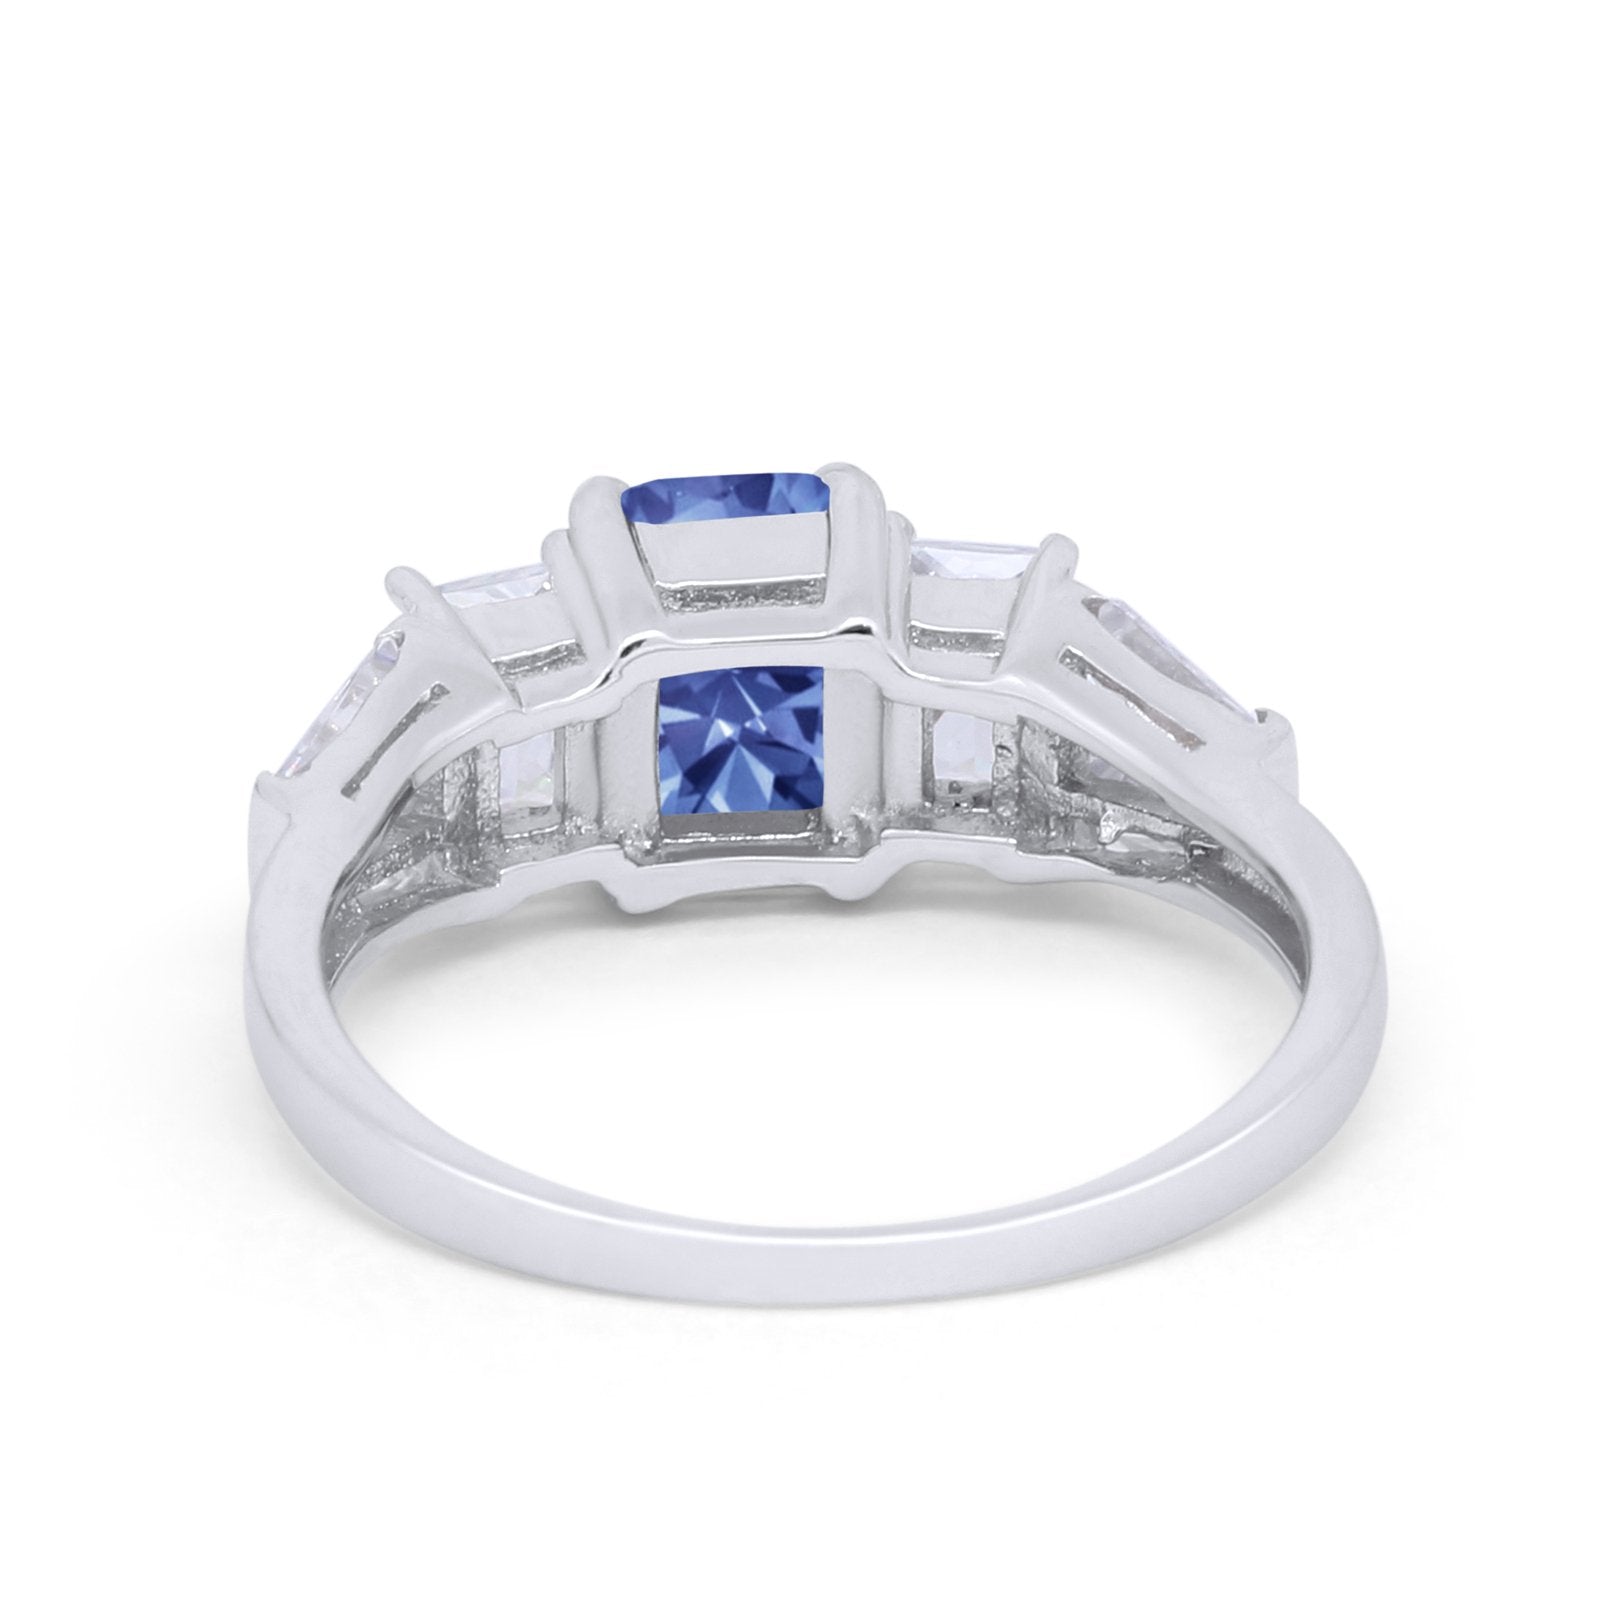 Engagement Ring Radiant Cut Simulated Tanzanite CZ 925 Sterling Silver